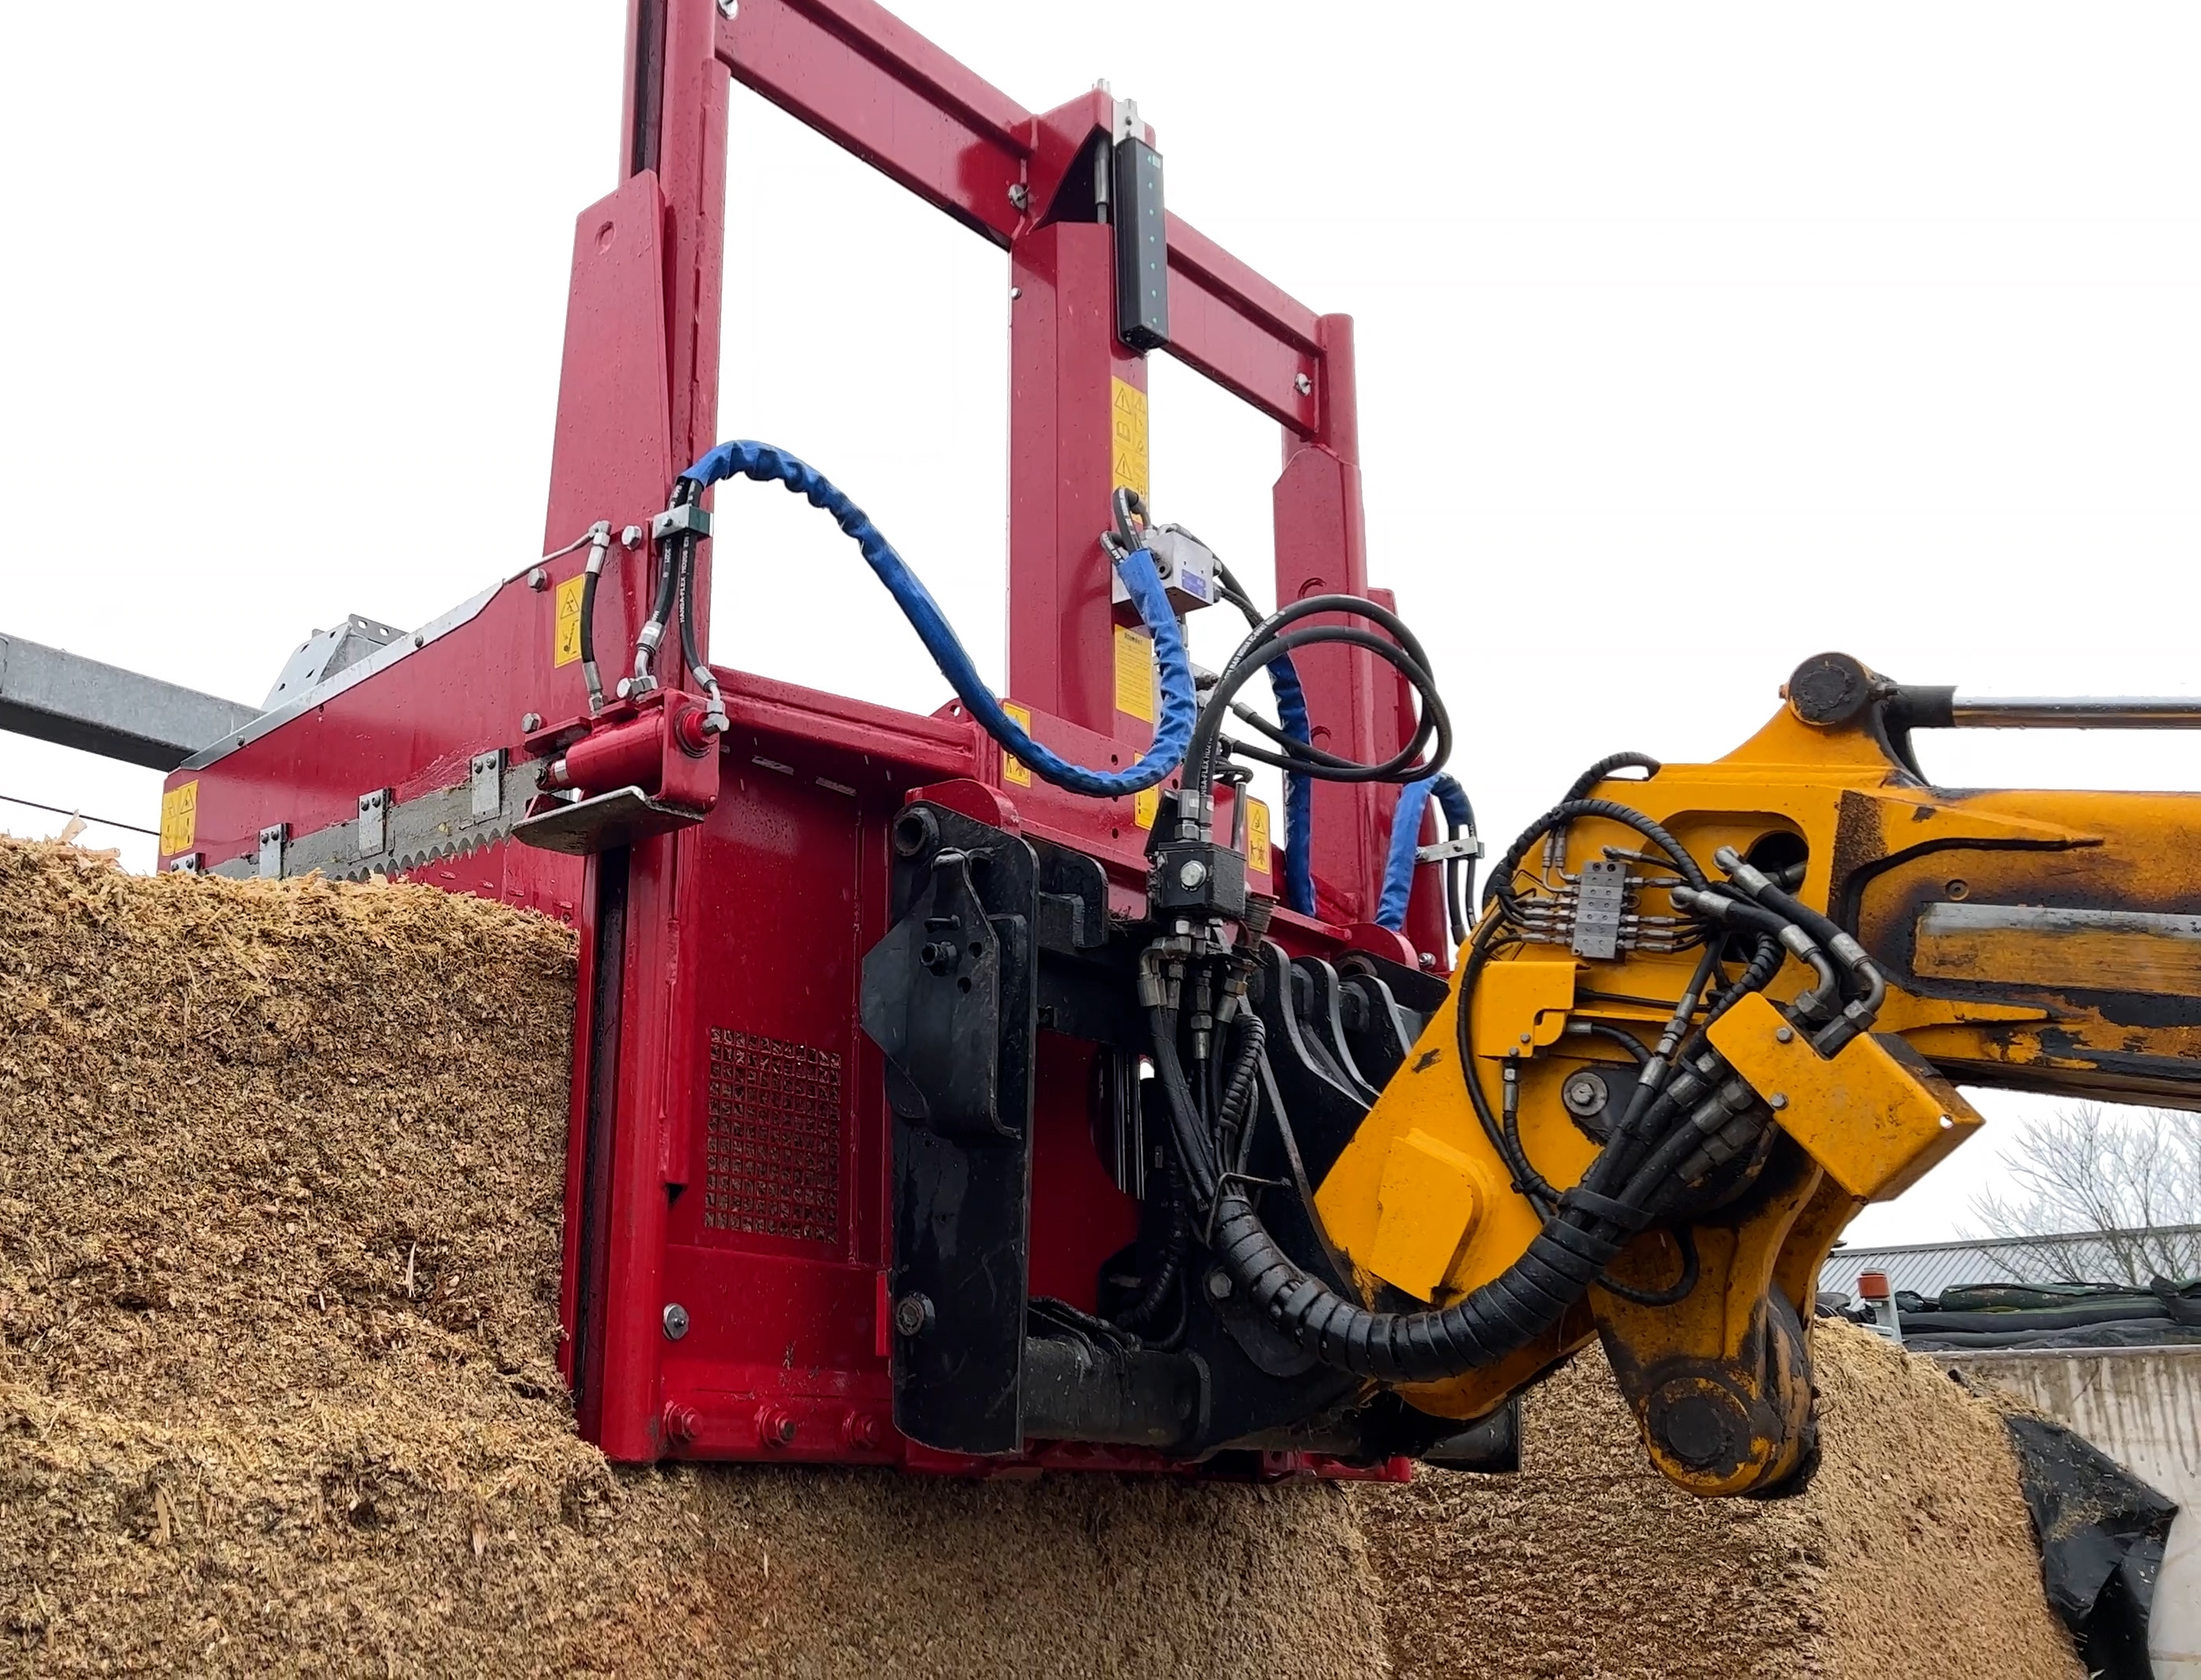 Especially in the case of high silage blocks, the V-CONNECT Cut Control helps to ensure a straight cut despite poor visibility; in this example, the silage block cutter is attached to a telescopic handler.